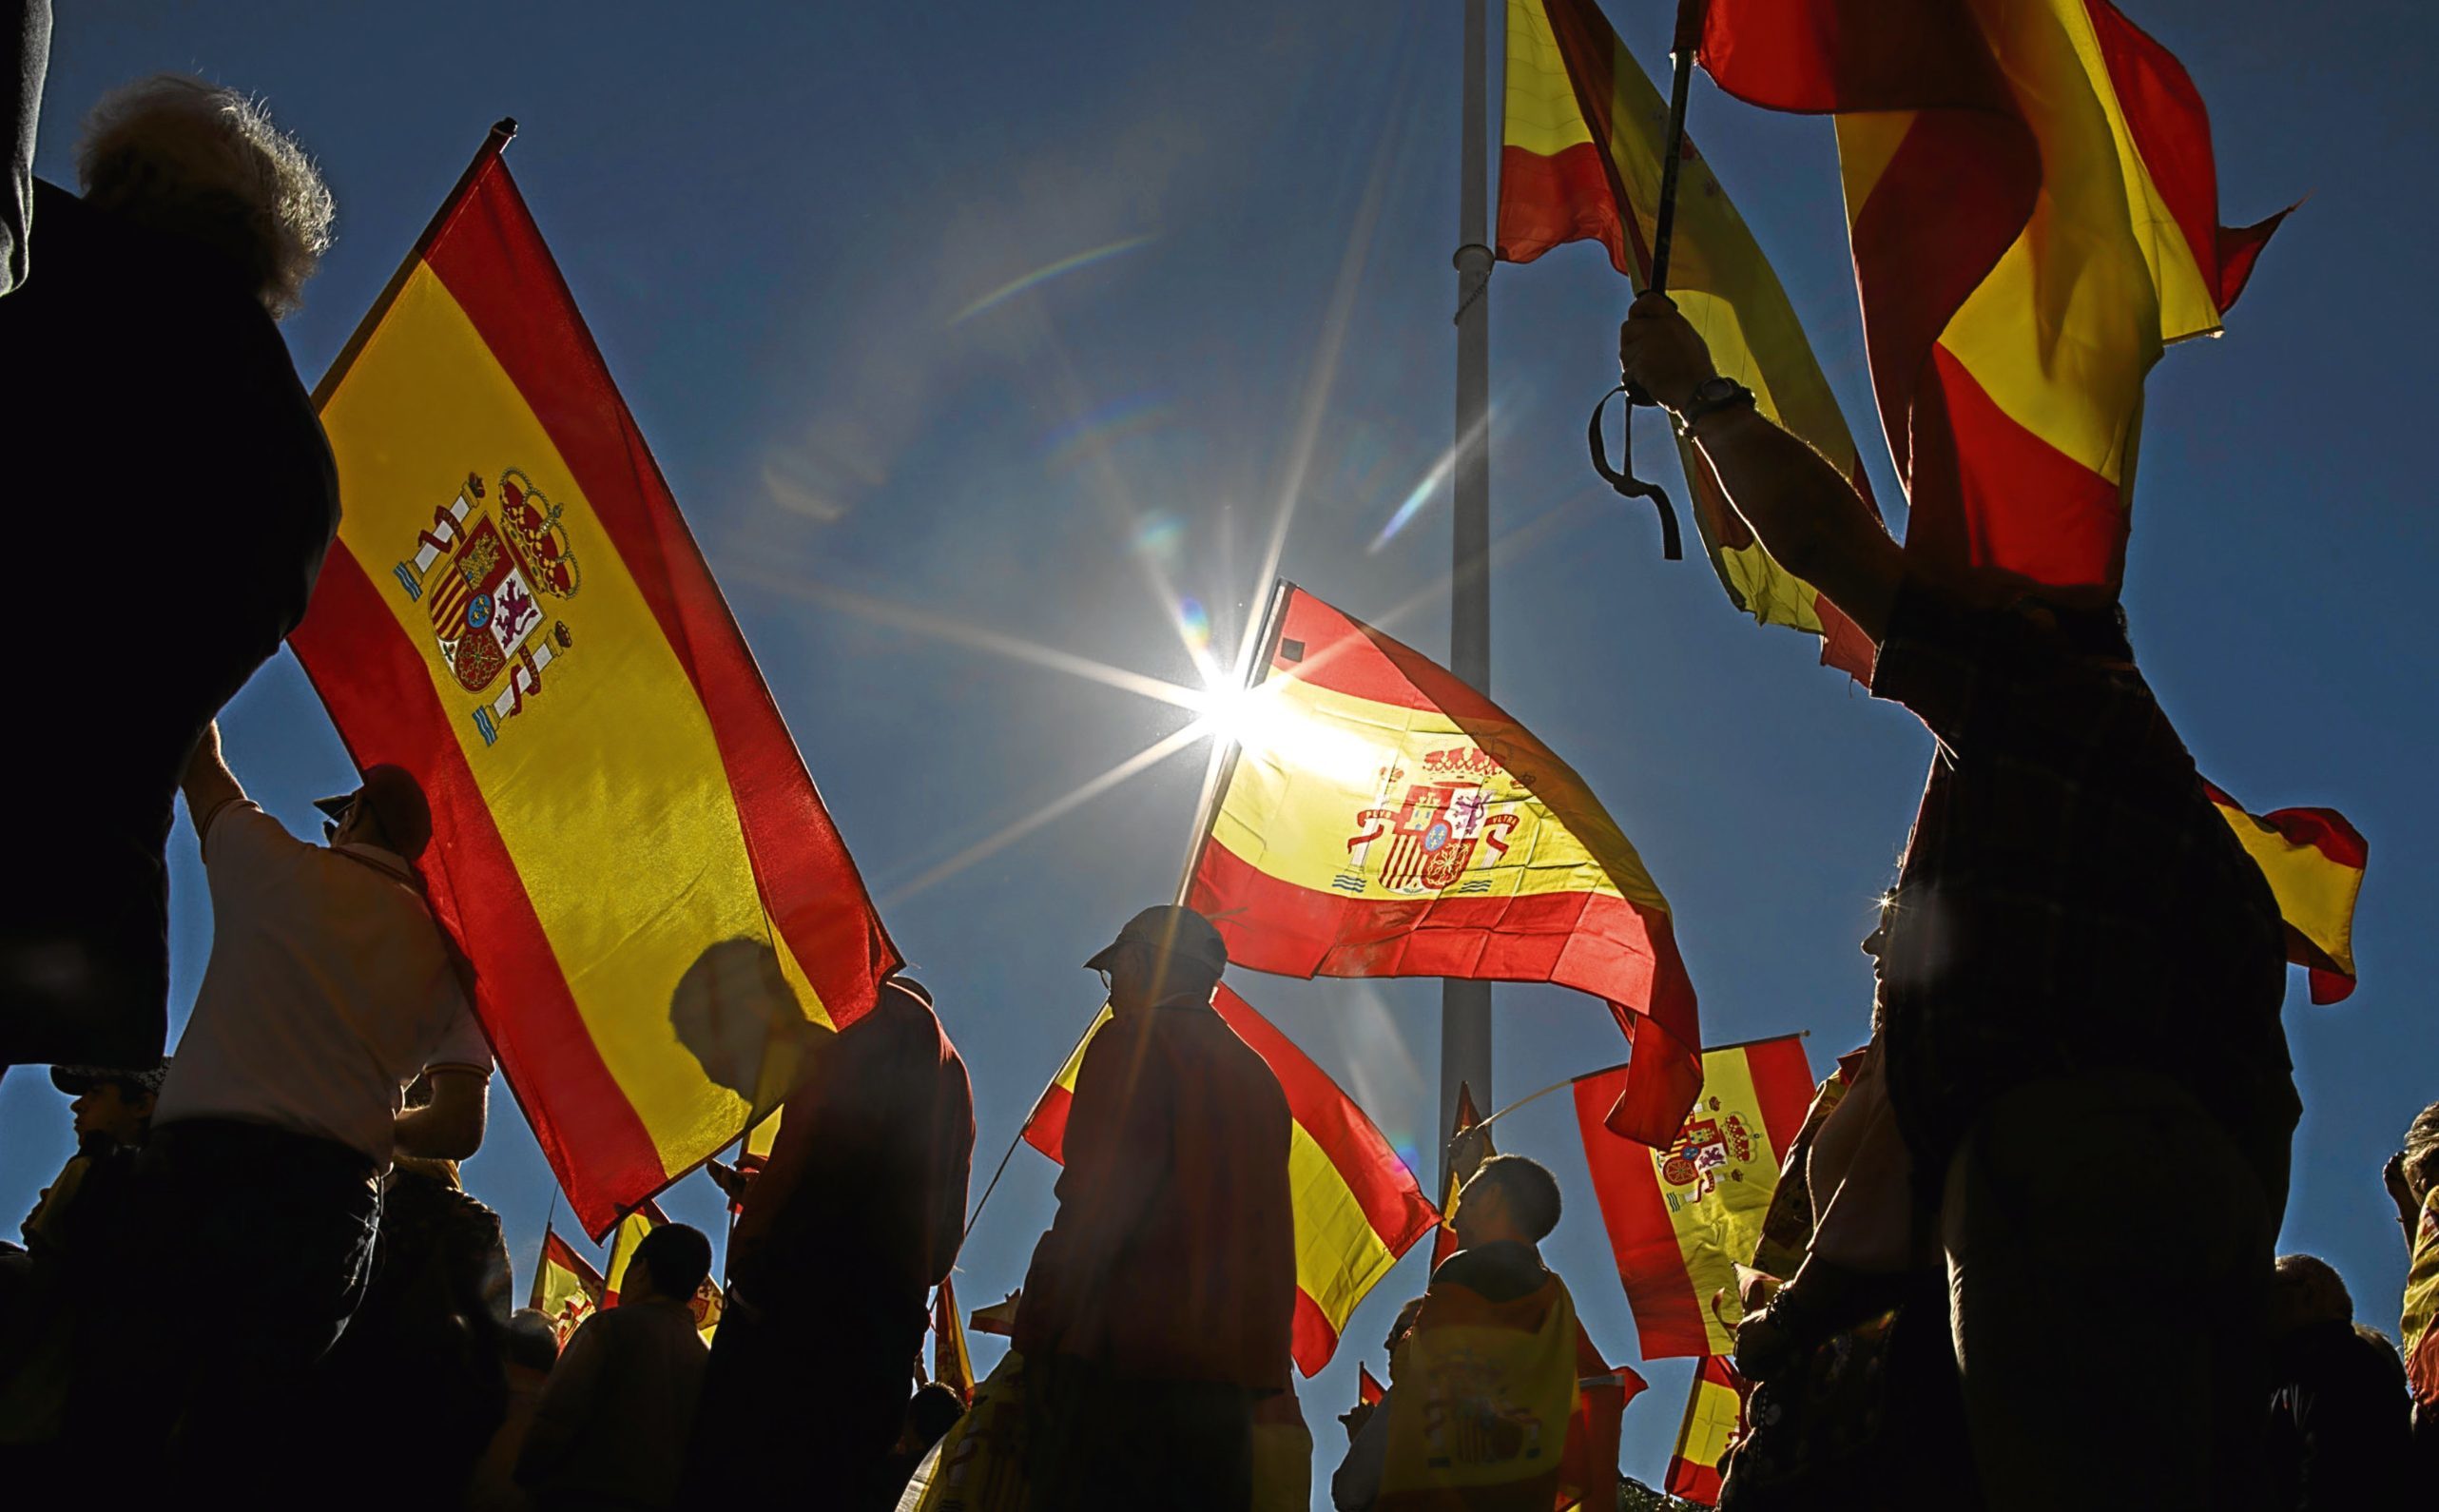 Demonstrators in Madrid hold Spanish flags as they protest in support of Article 155 and against the independence of Catalonia.